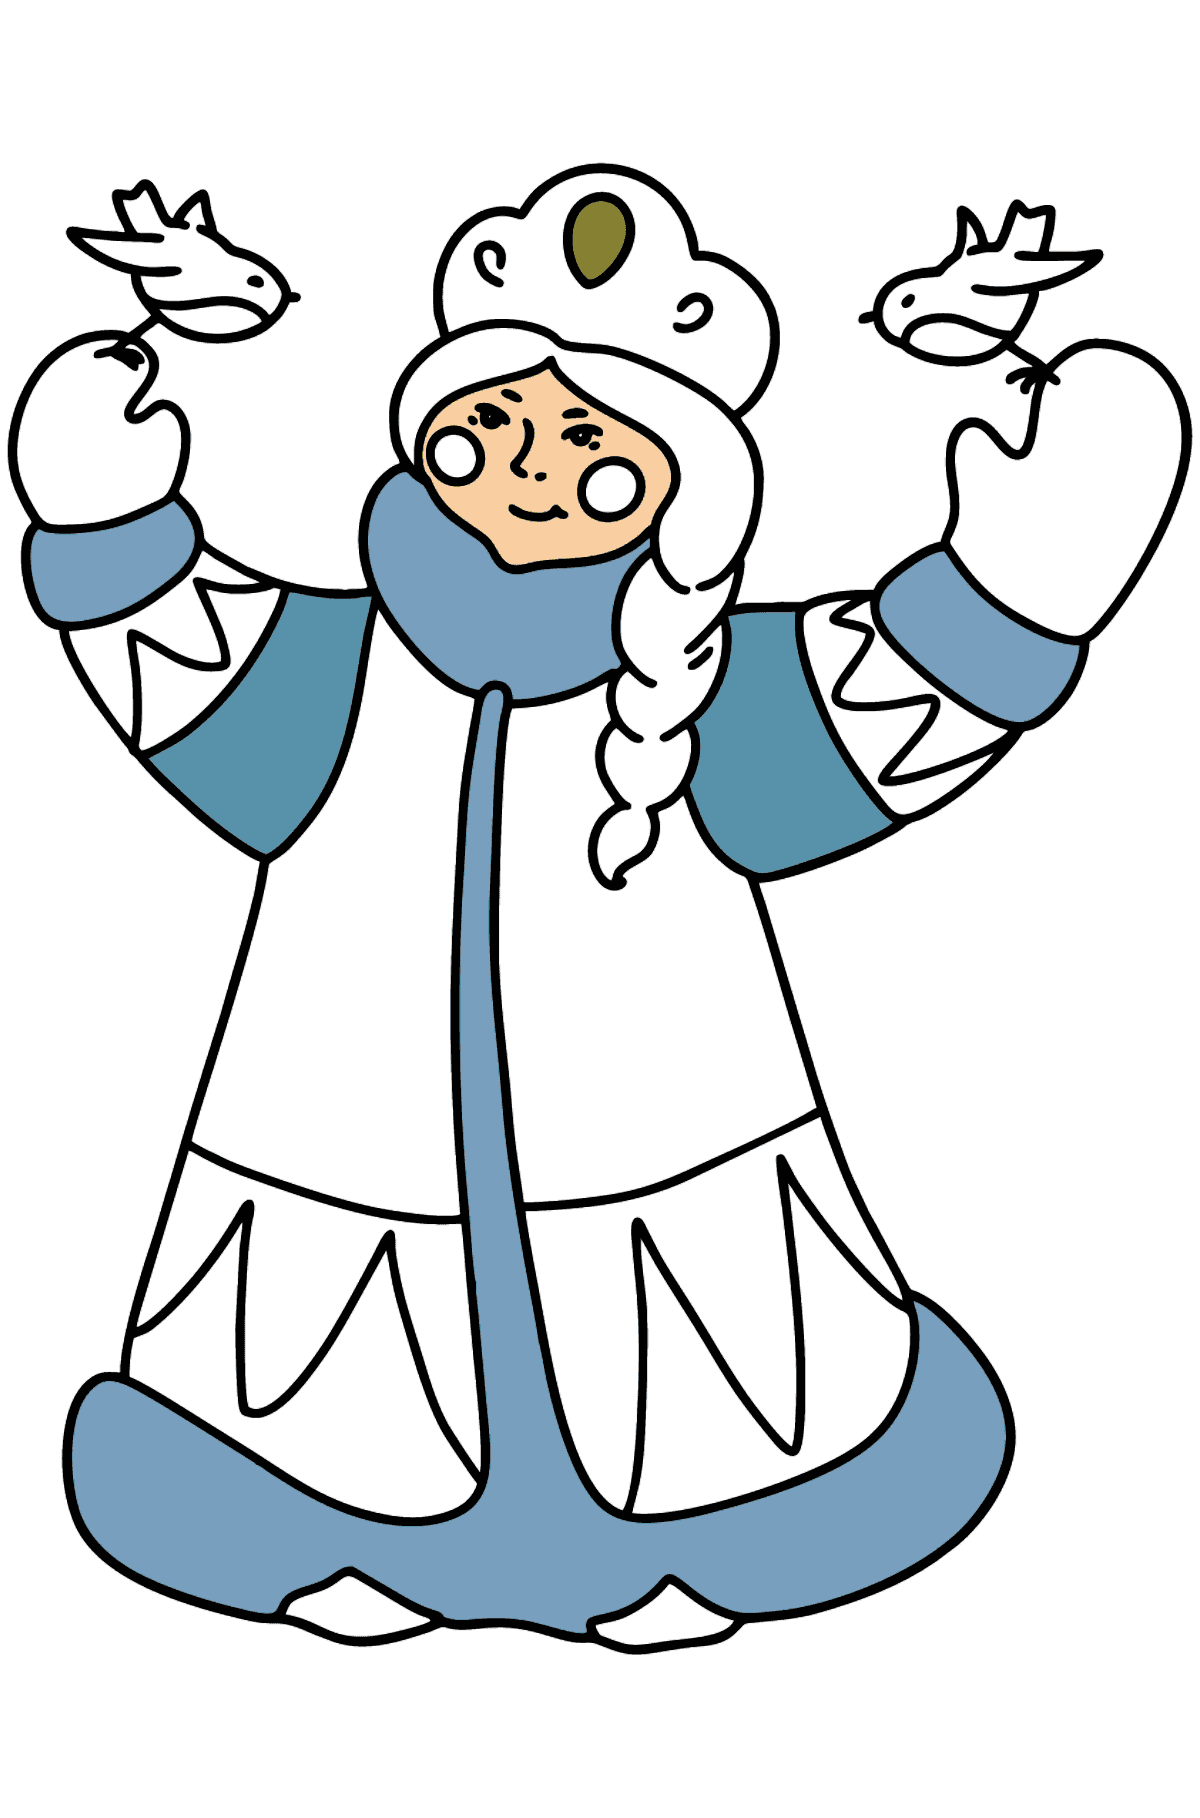 Snow maiden with birds coloring page - Coloring Pages for Kids